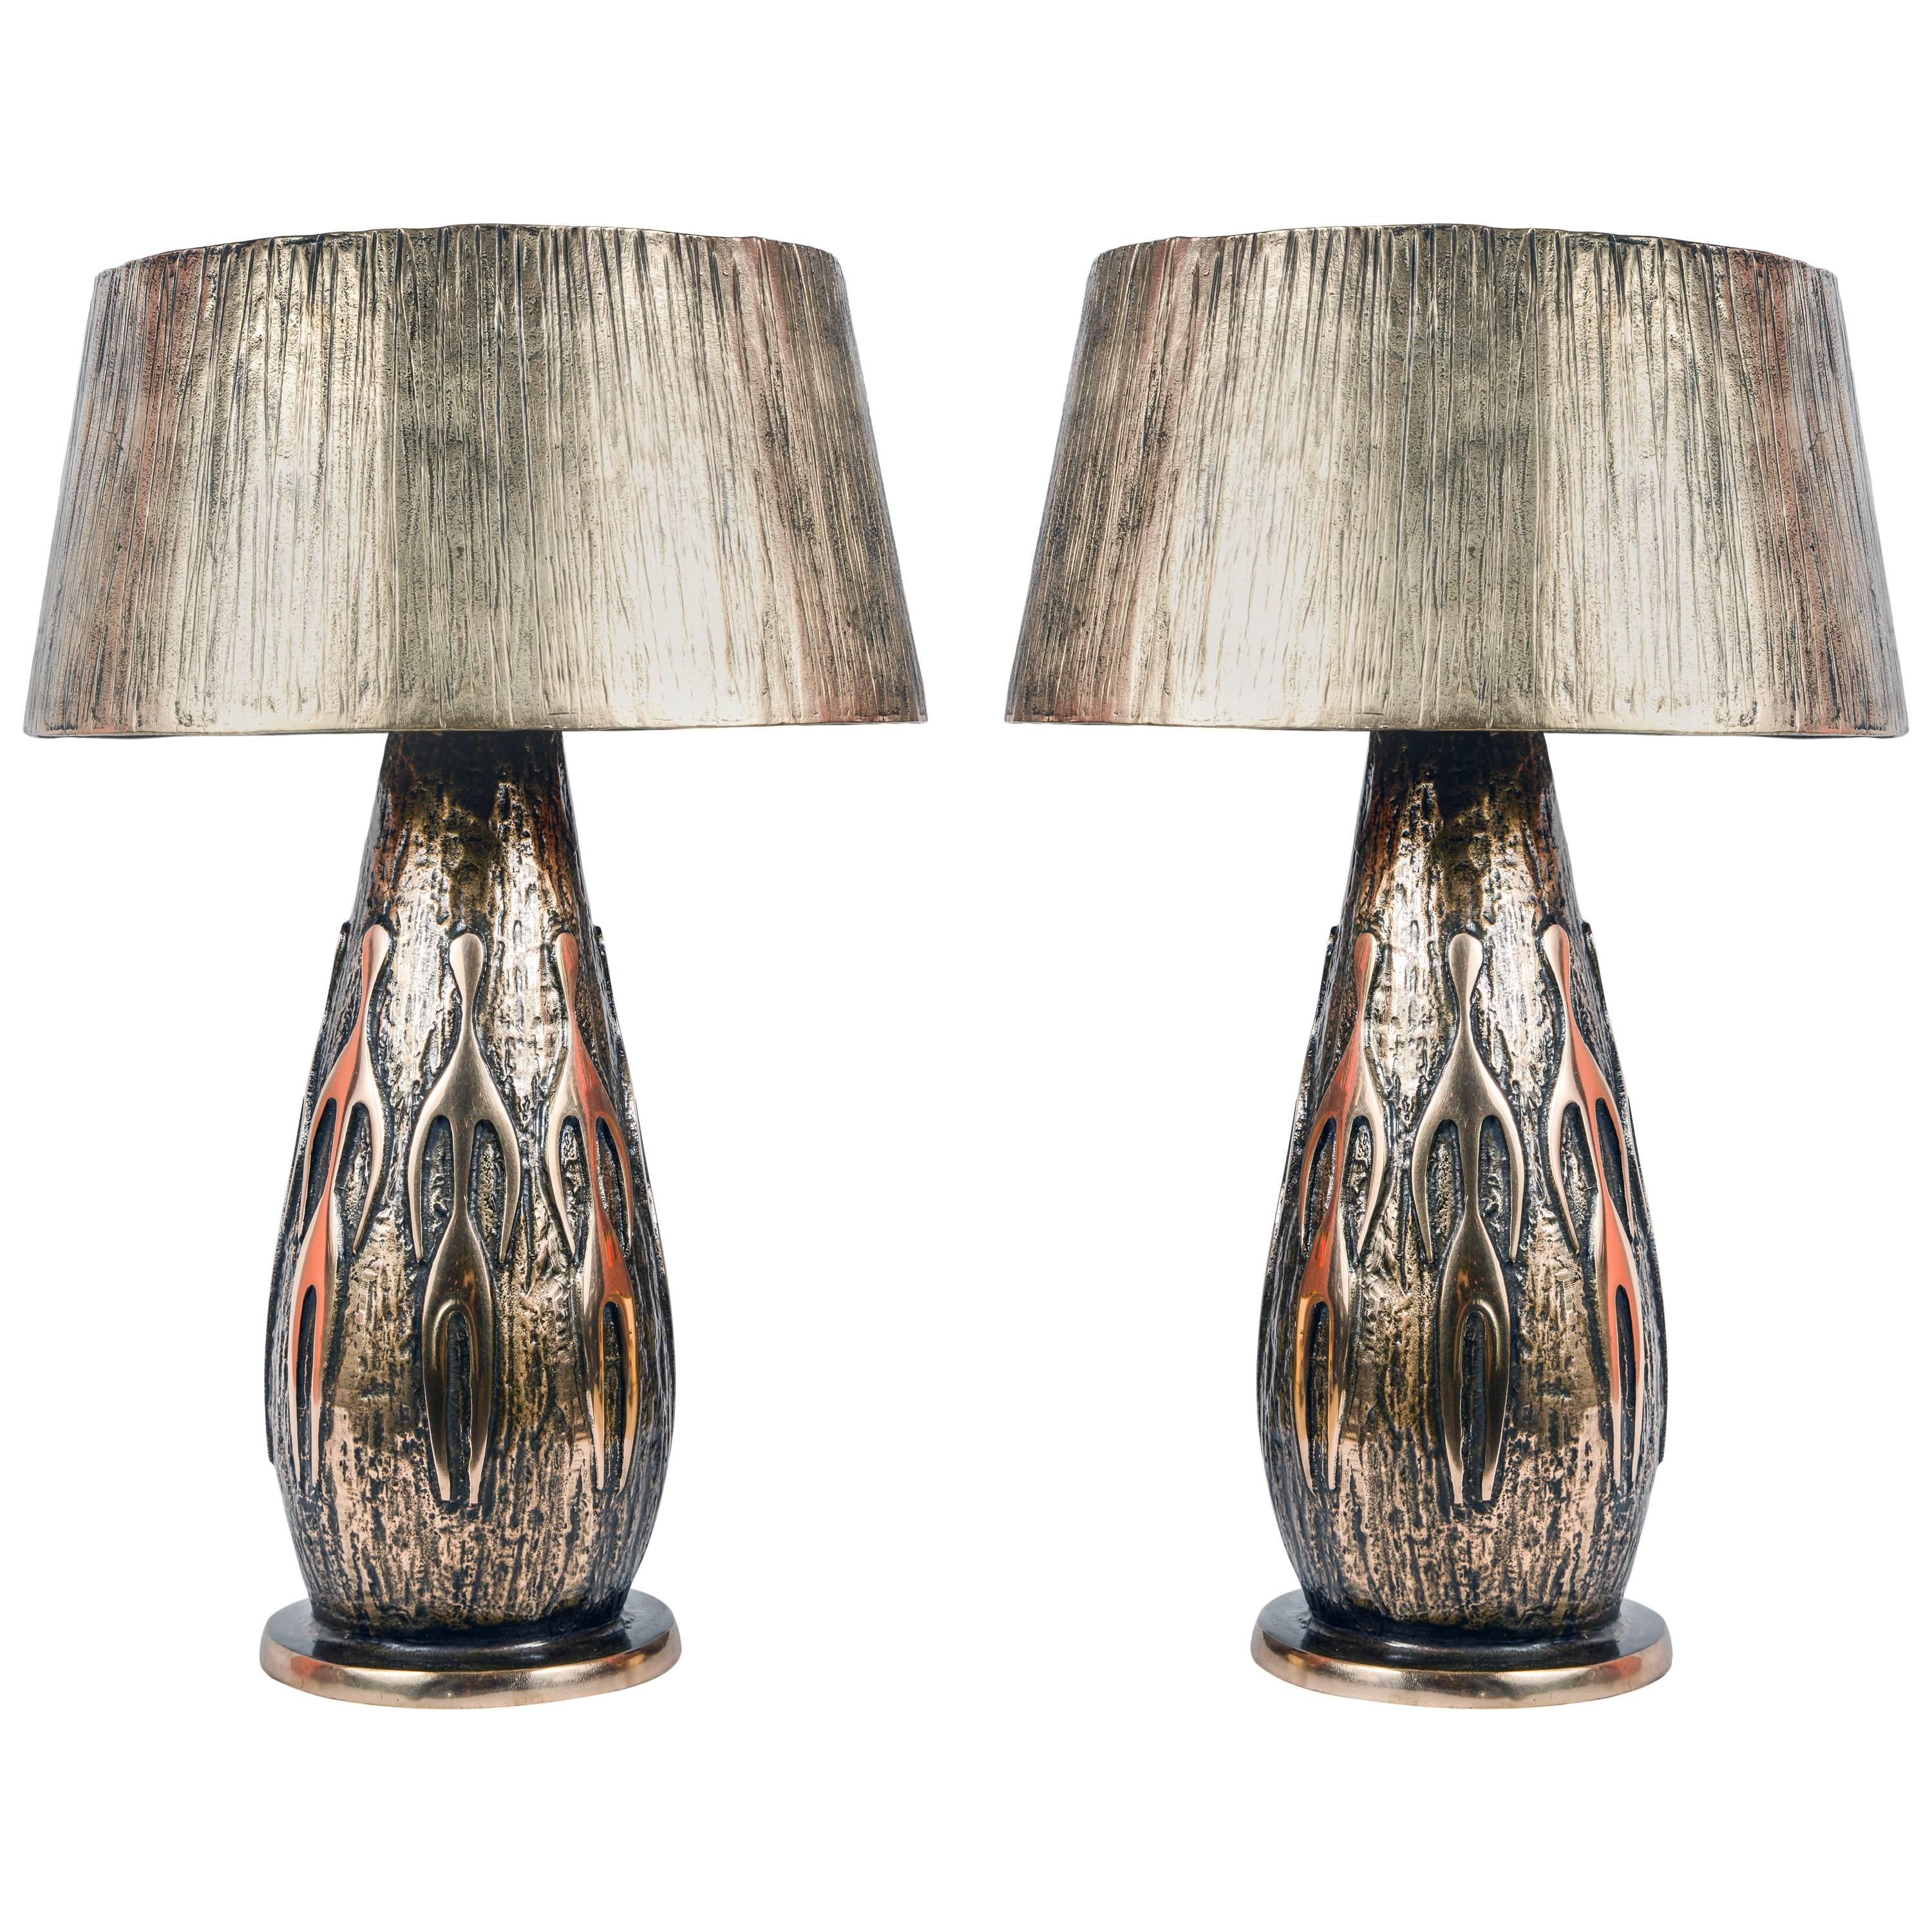 Pair of Bronze Table Lamps by Régis Royant